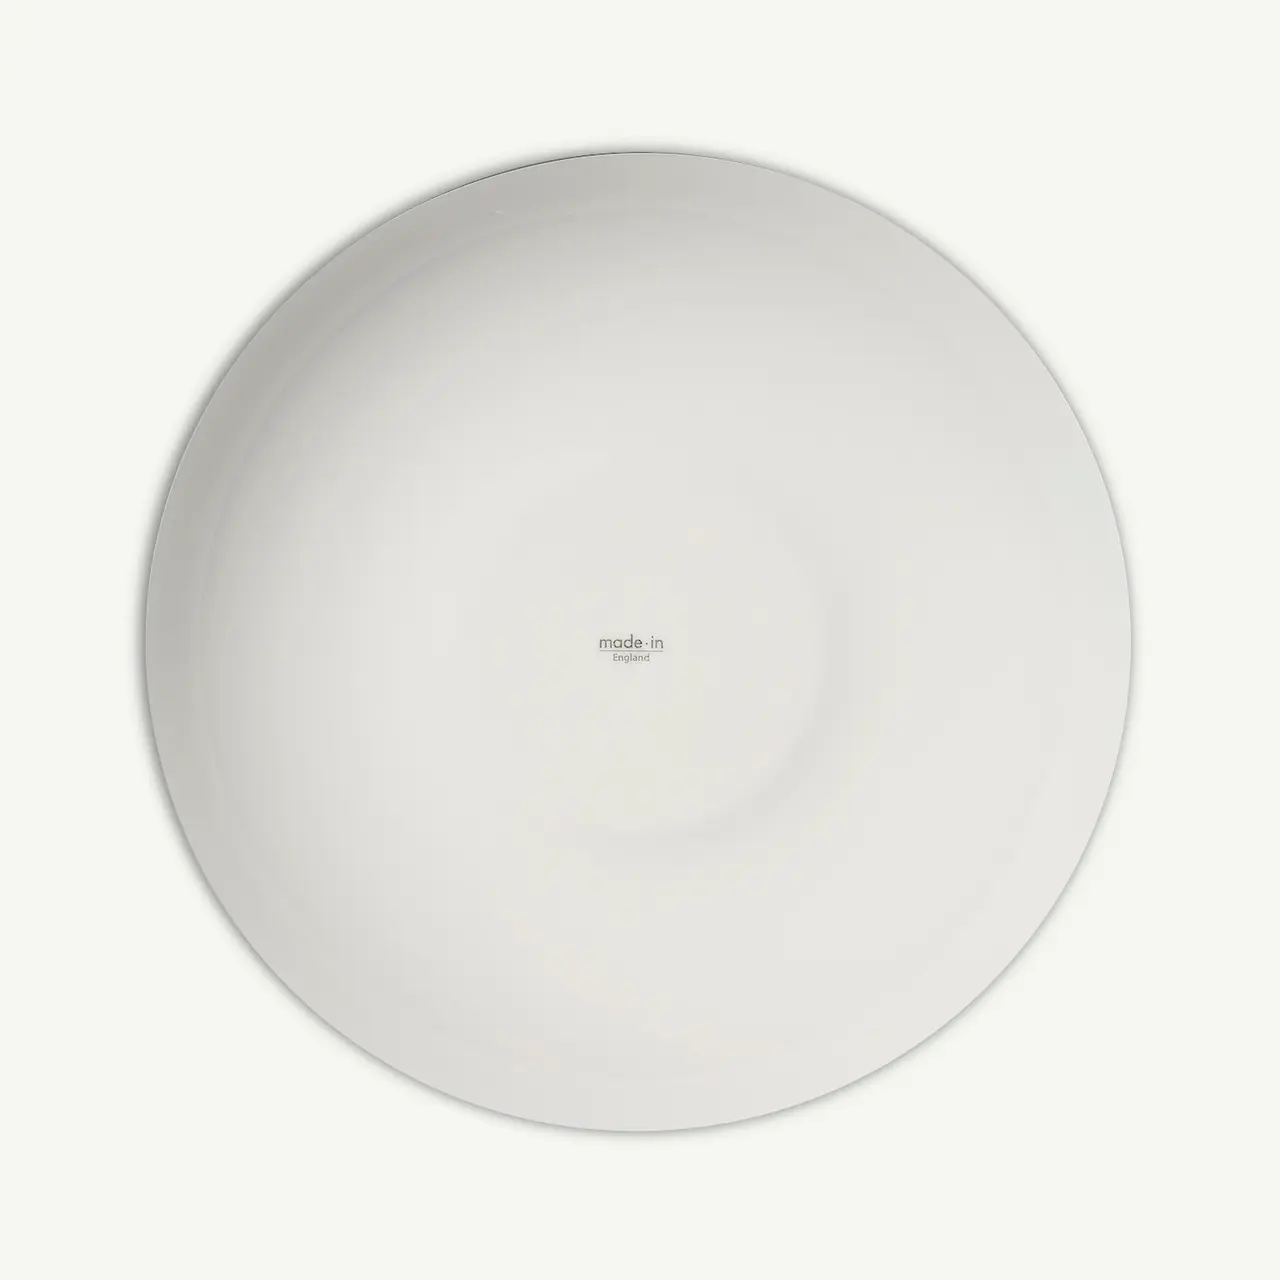 A plain white round plate with a text at the center that appears to be a brand name or logo.